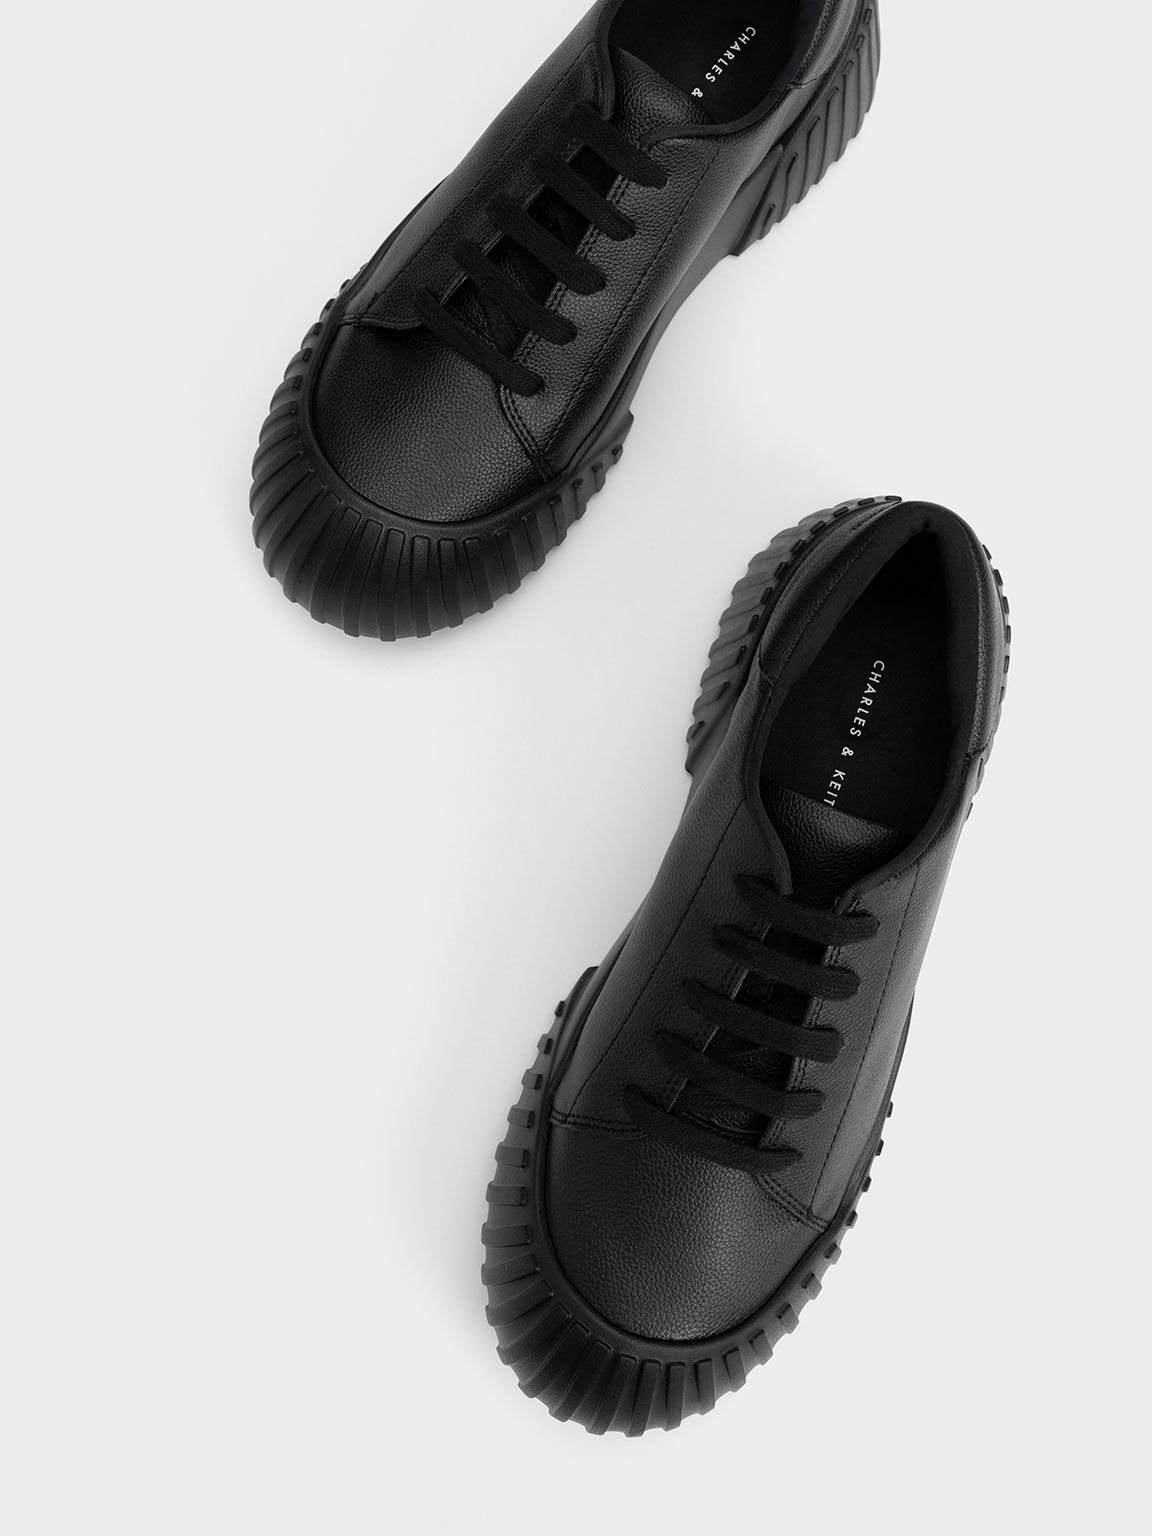 Adrian Chunky Sole Sneakers, Black, hi-res